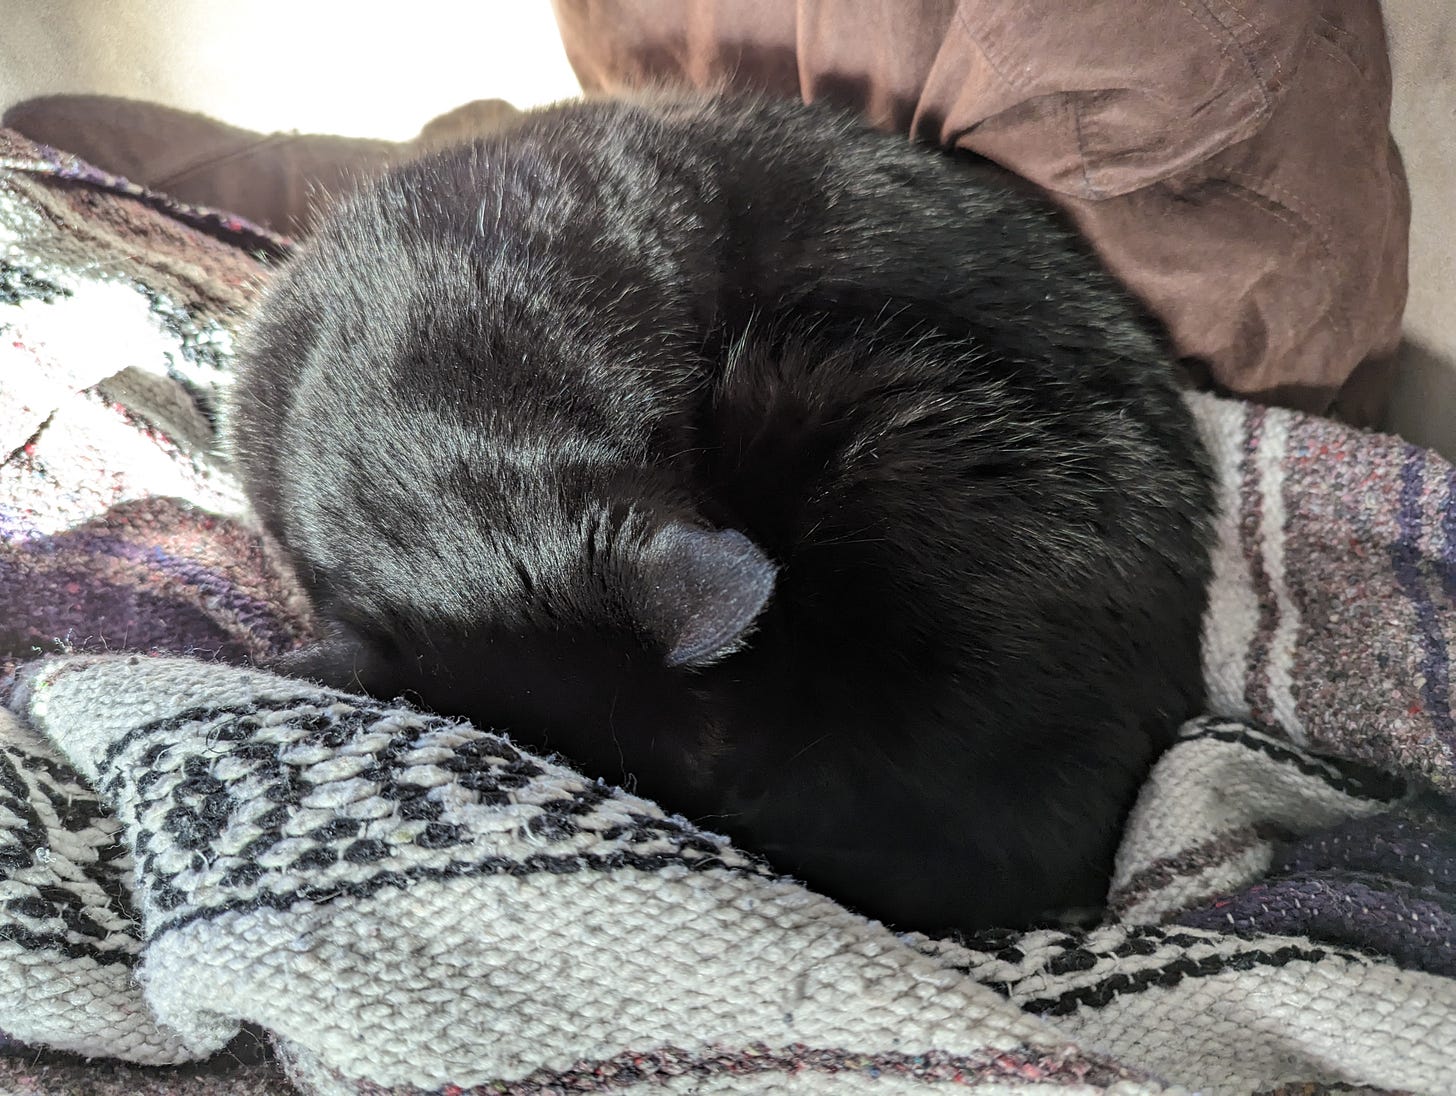 A black cat, curled into a ball, nestles into a blanket featuring purple, white, and black stripes.